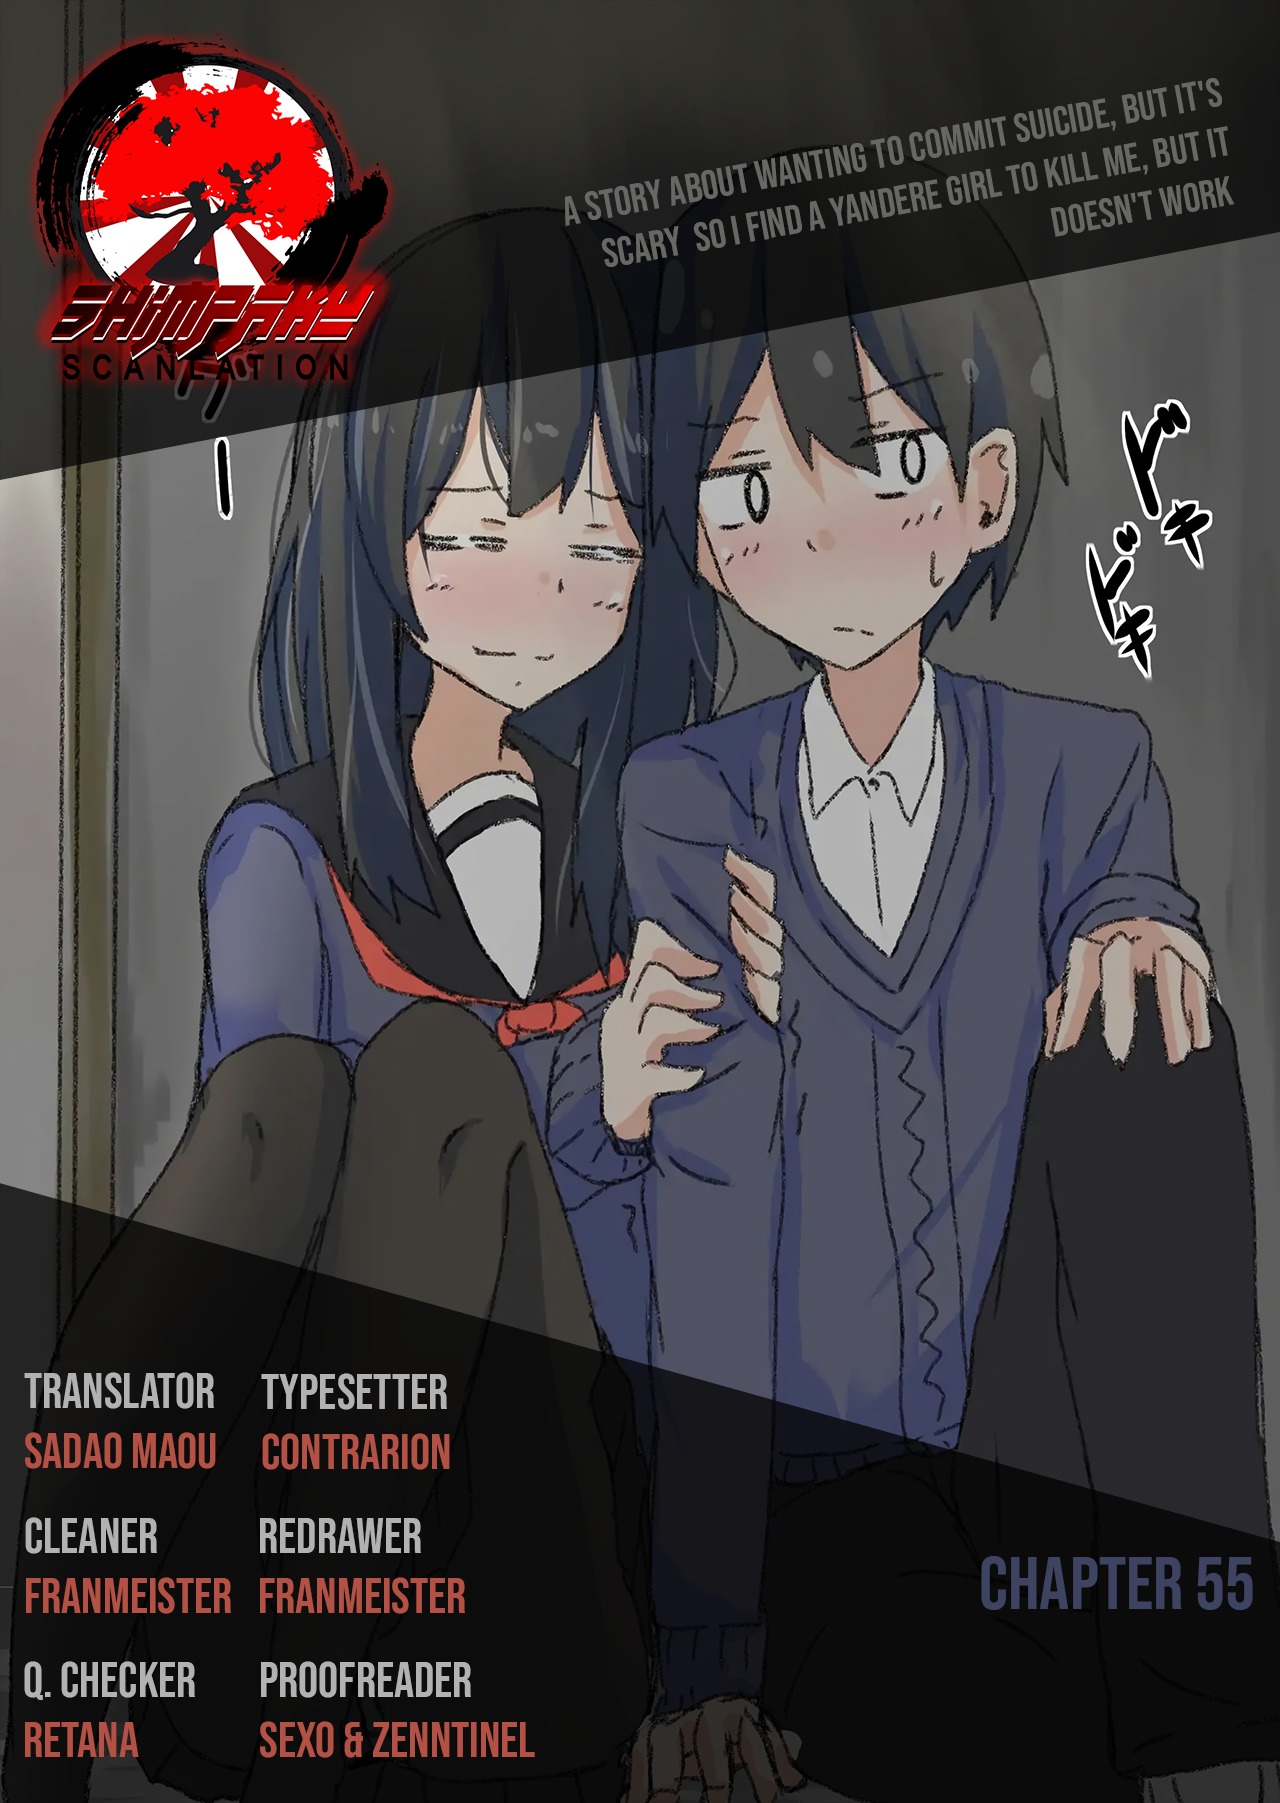 A Story About Wanting To Commit Suicide, But It's Scary So I Find A Yandere Girl To Kill Me, But It Doesn't Work ch.55